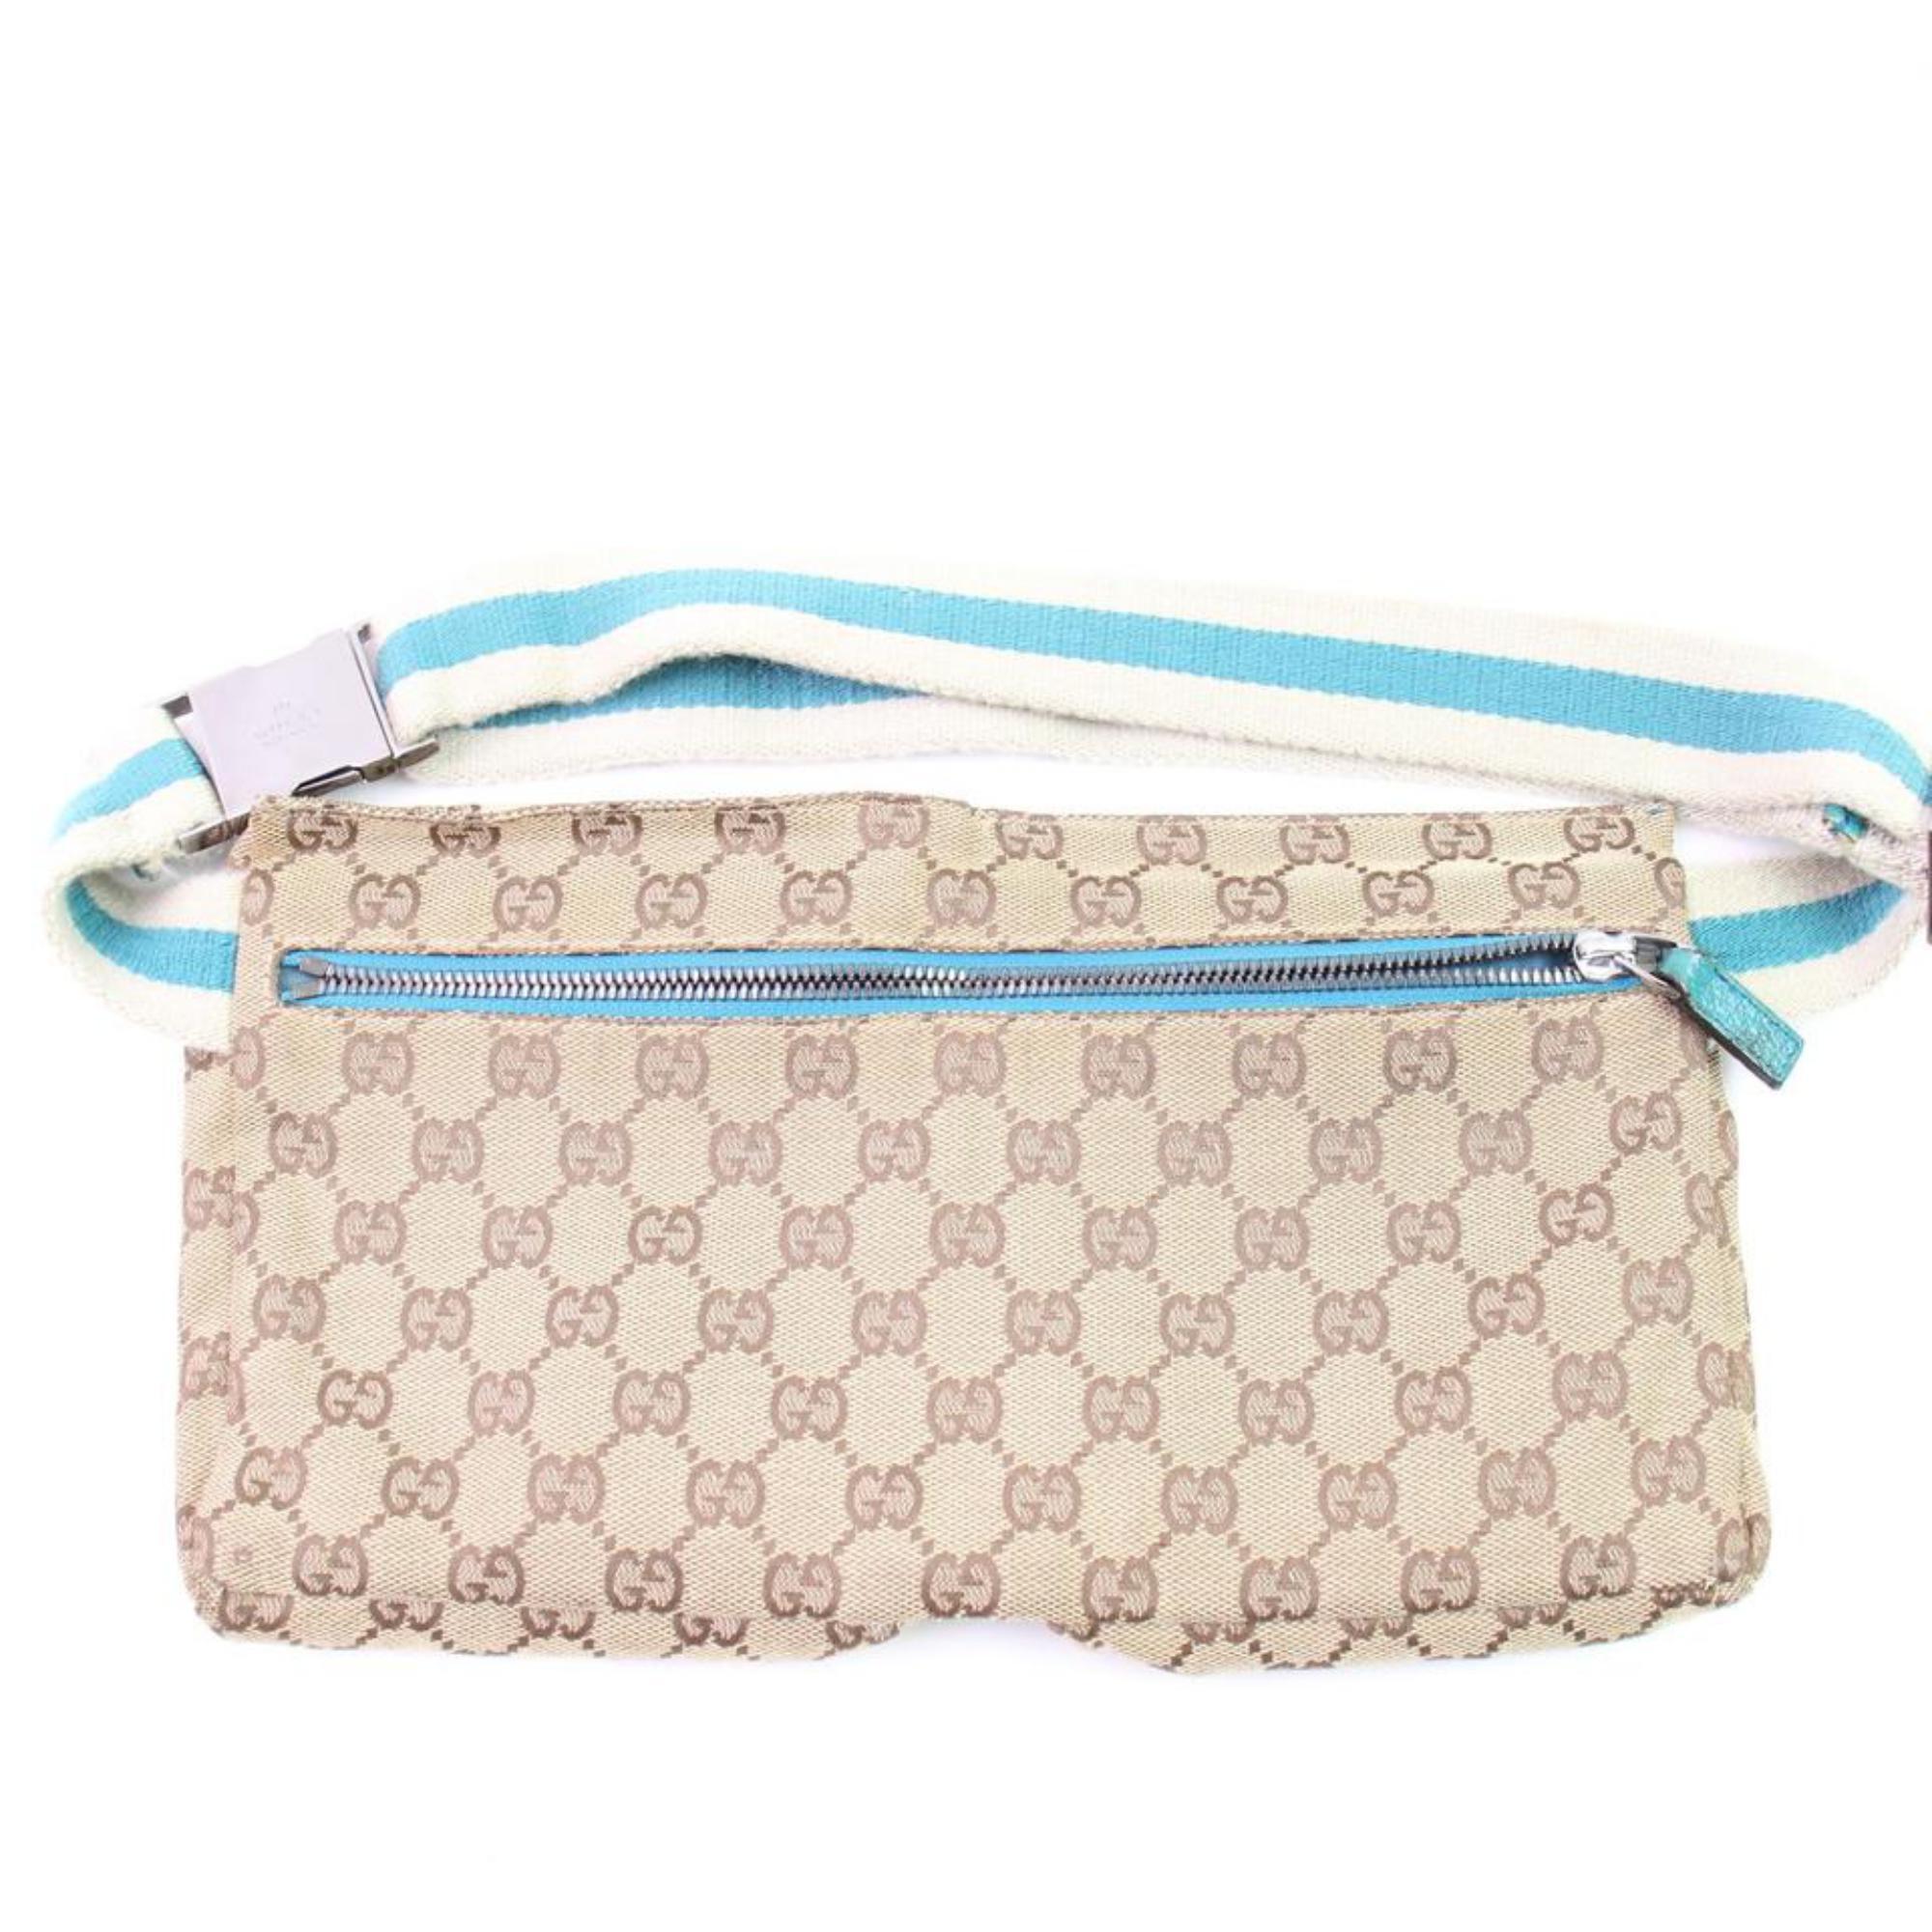 Gucci Torquoise Gg Waist Pouch Fanny Pack 867039 Beige Canvas Cross Body Bag For Sale 3